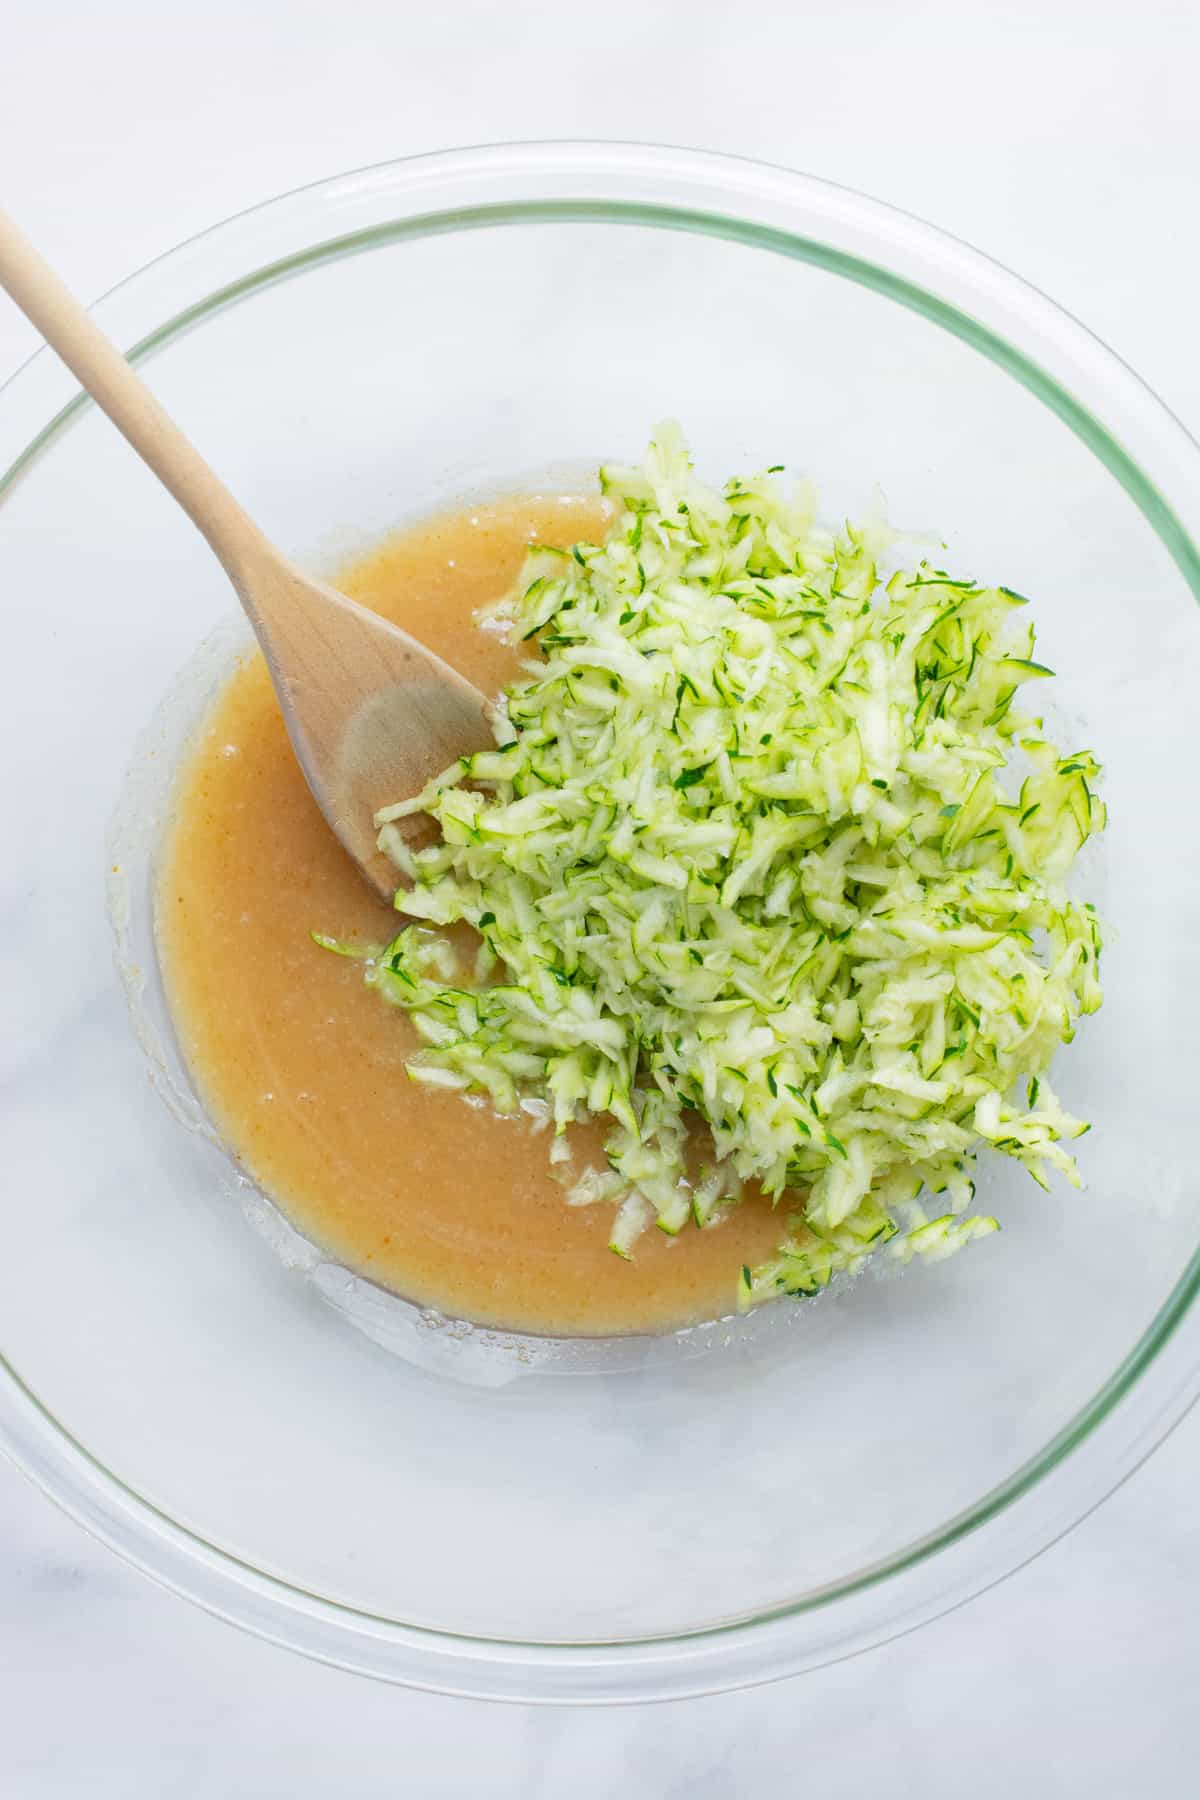 Wet ingredients and grated zucchini in a glass bowl.